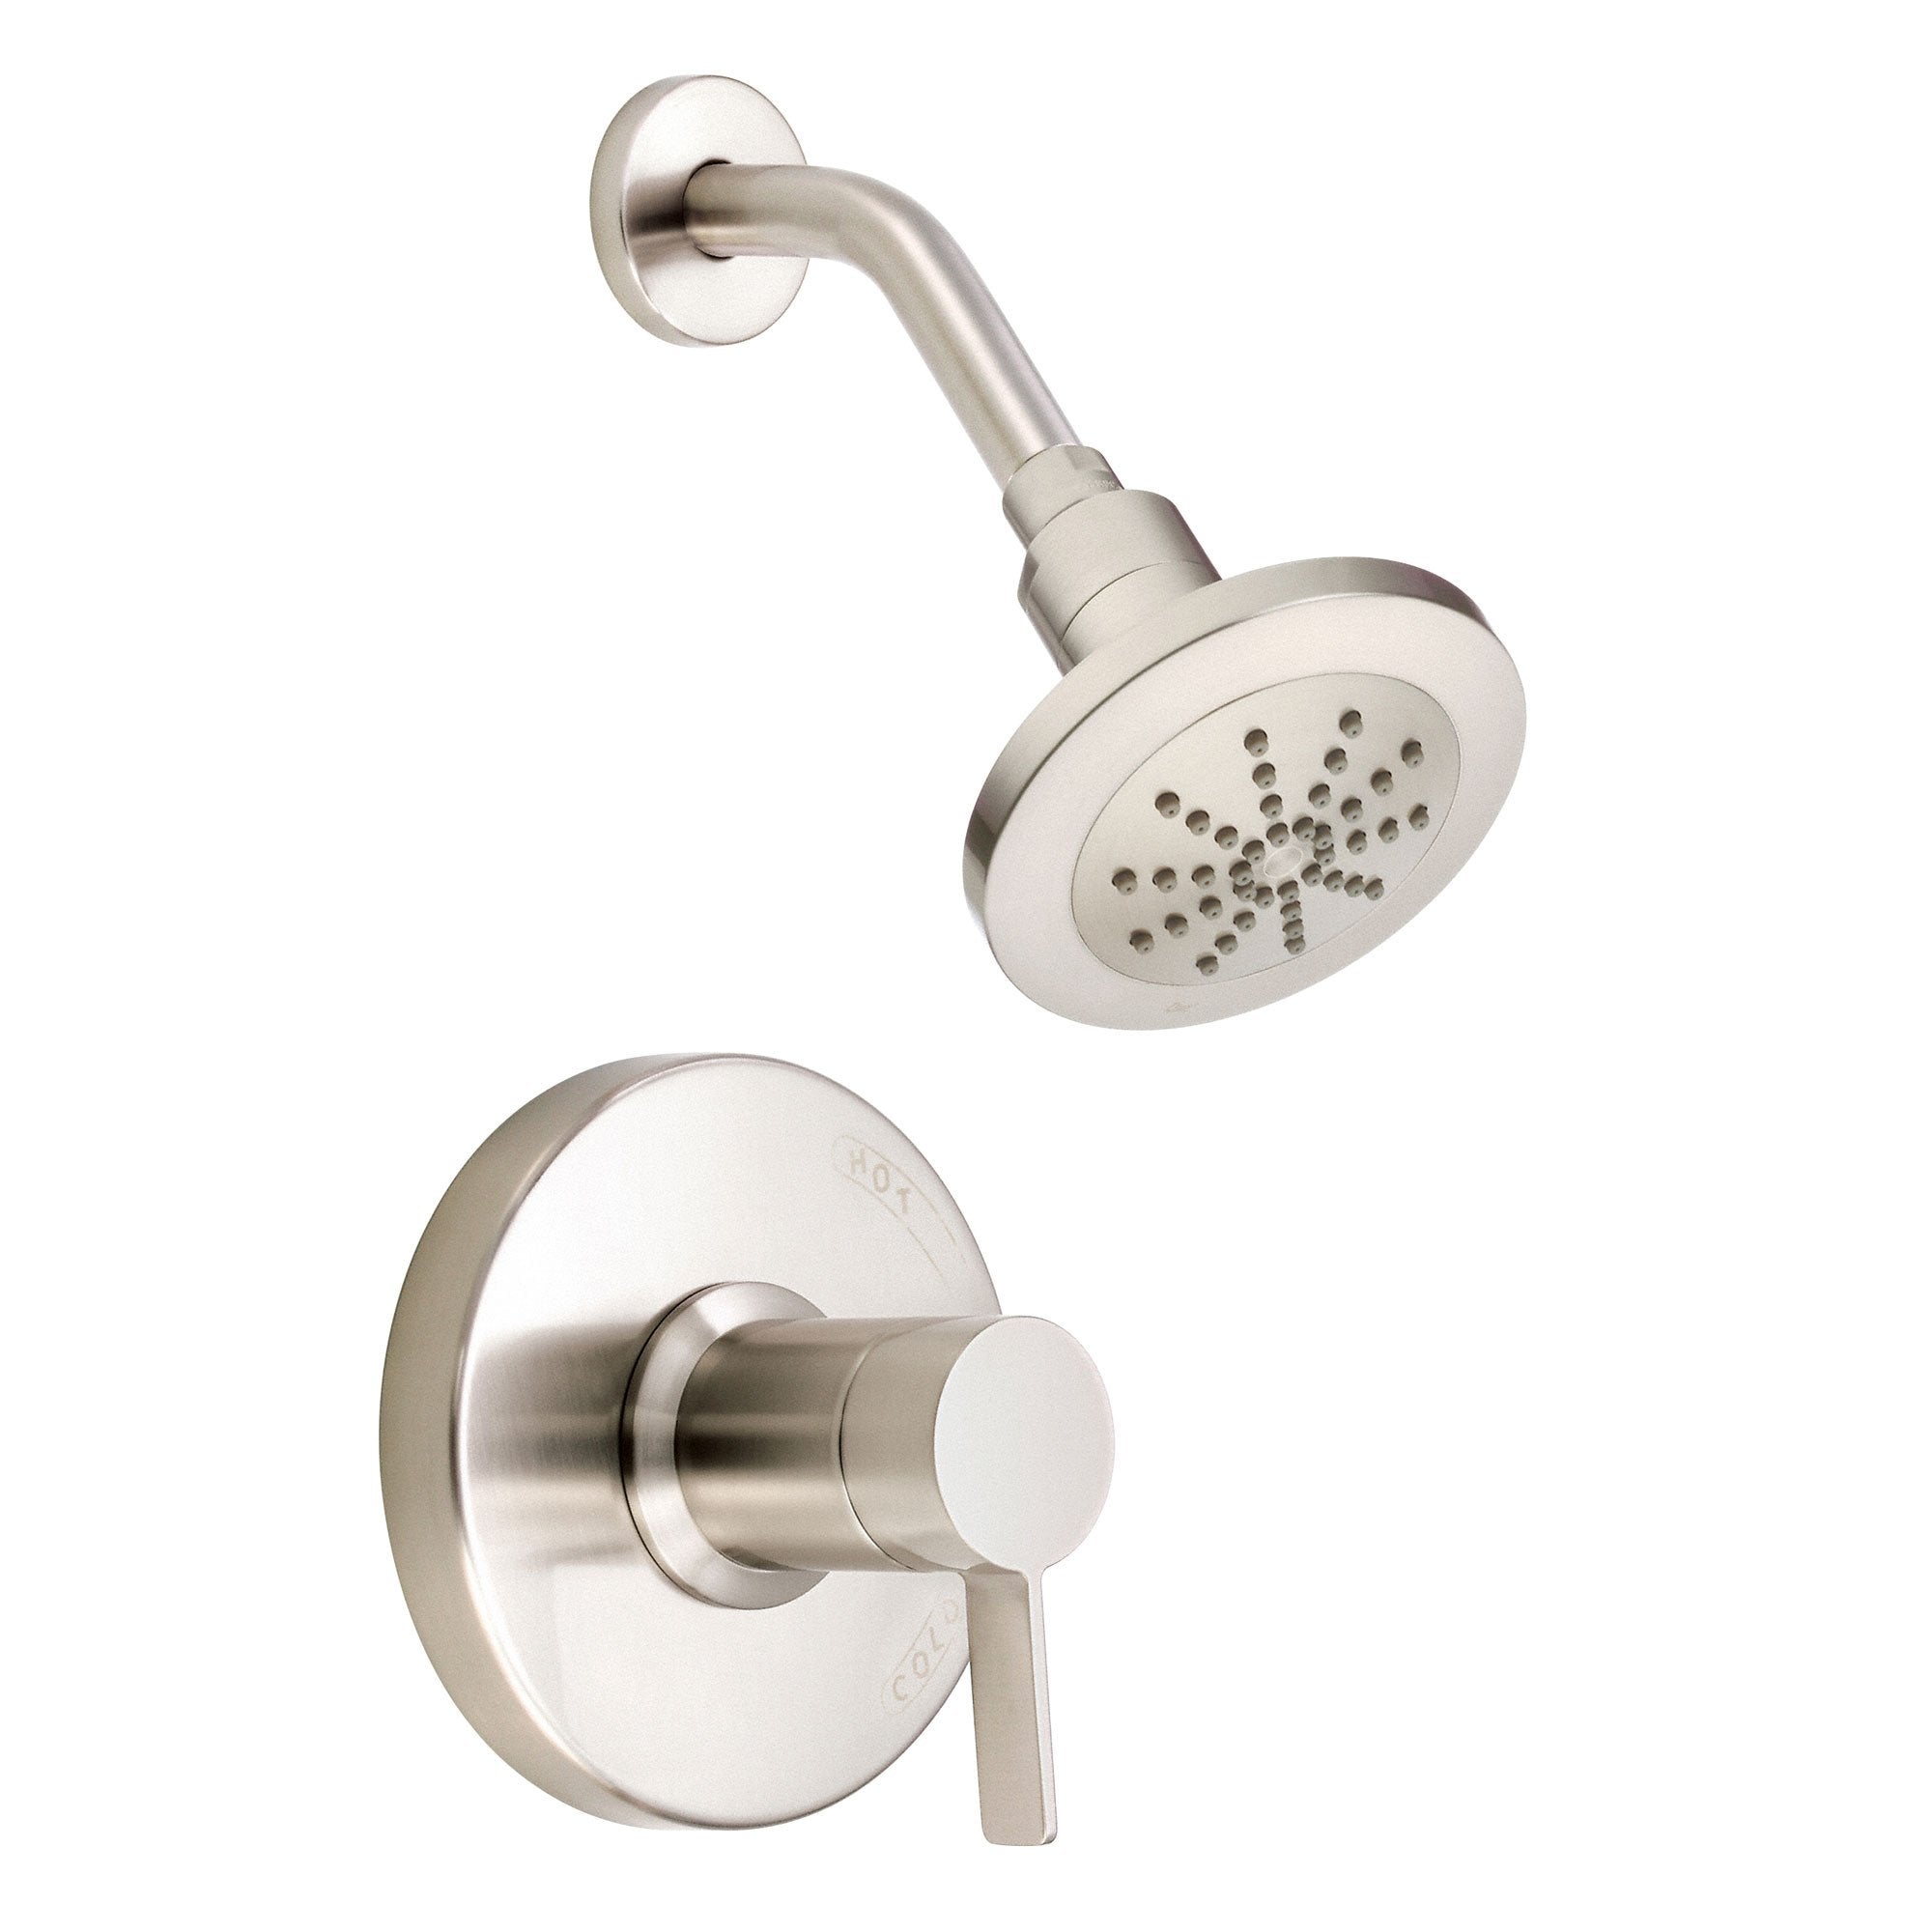 Danze Amalfi Brushed Nickel Single Handle Pressure Balance Shower Faucet INCLUDES Rough-in Valve